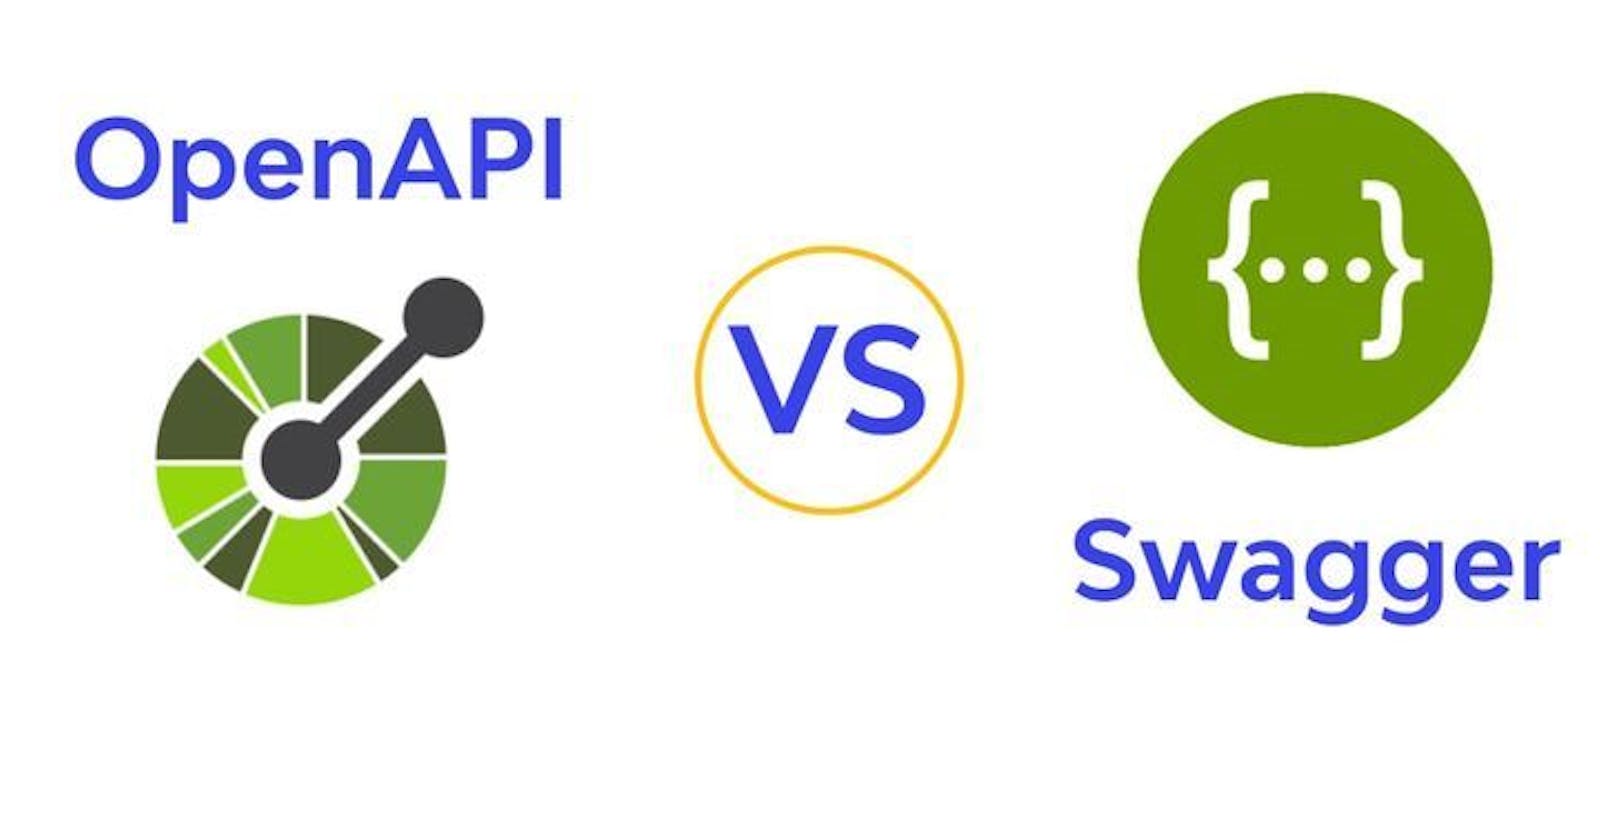 OpenAPI by Swagger